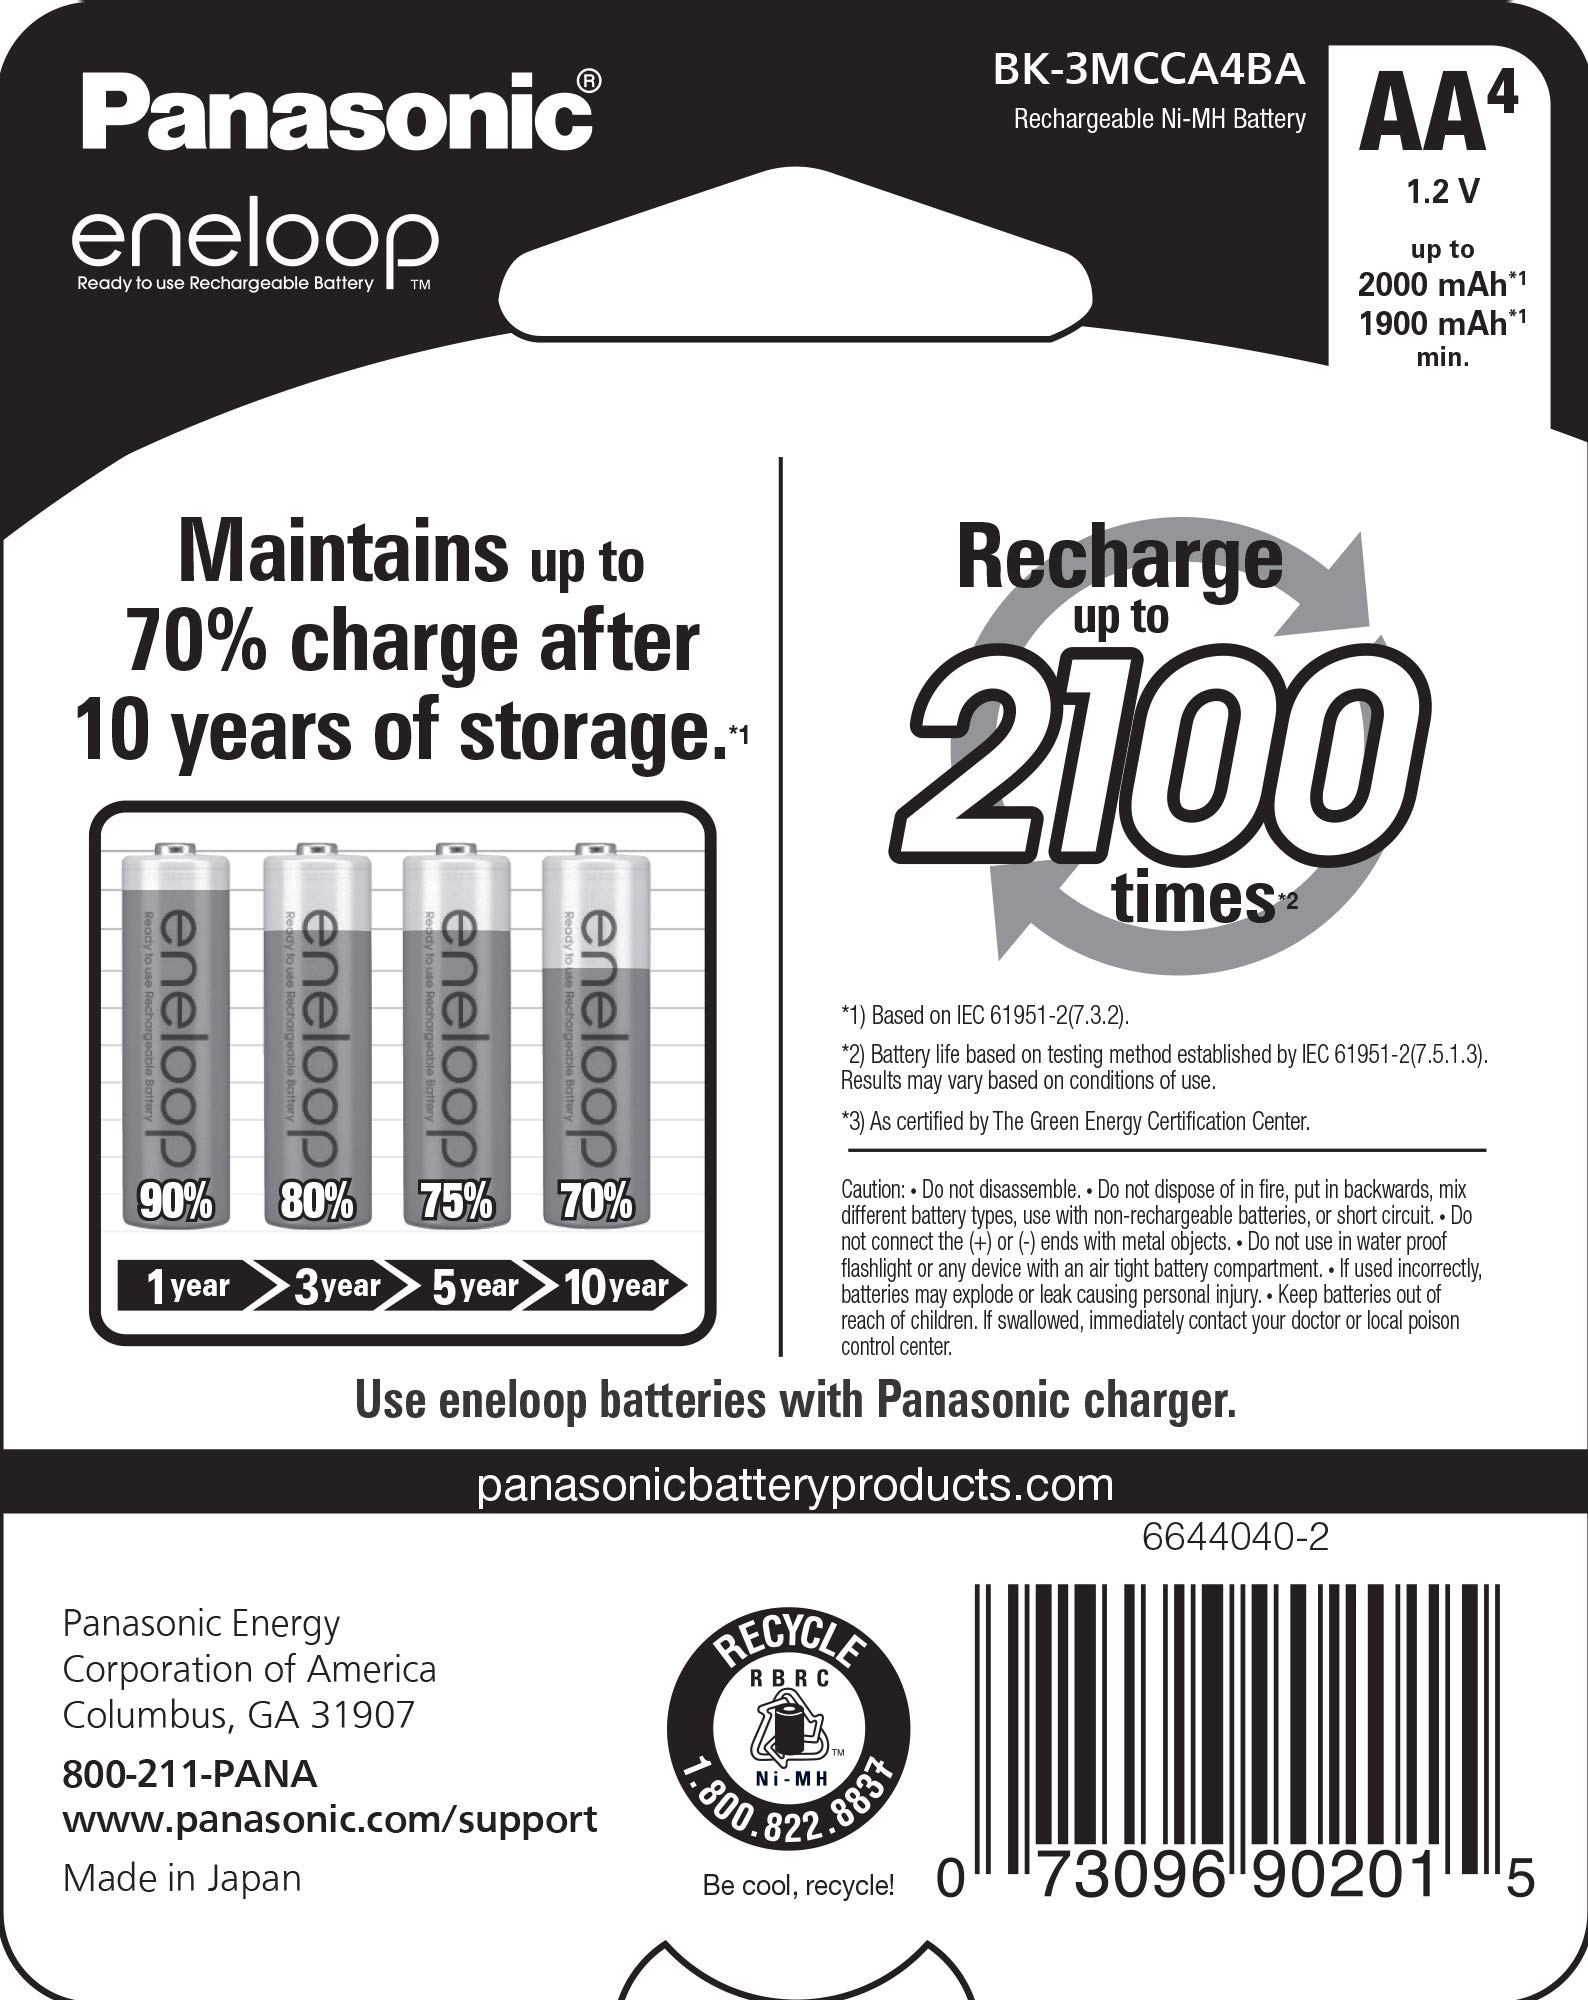 Panasonic BK-3MCCA4BA eneloop AA 2100 Cycle Ni-MH Pre-Charged Rechargeable Batteries, 4-Battery Pack